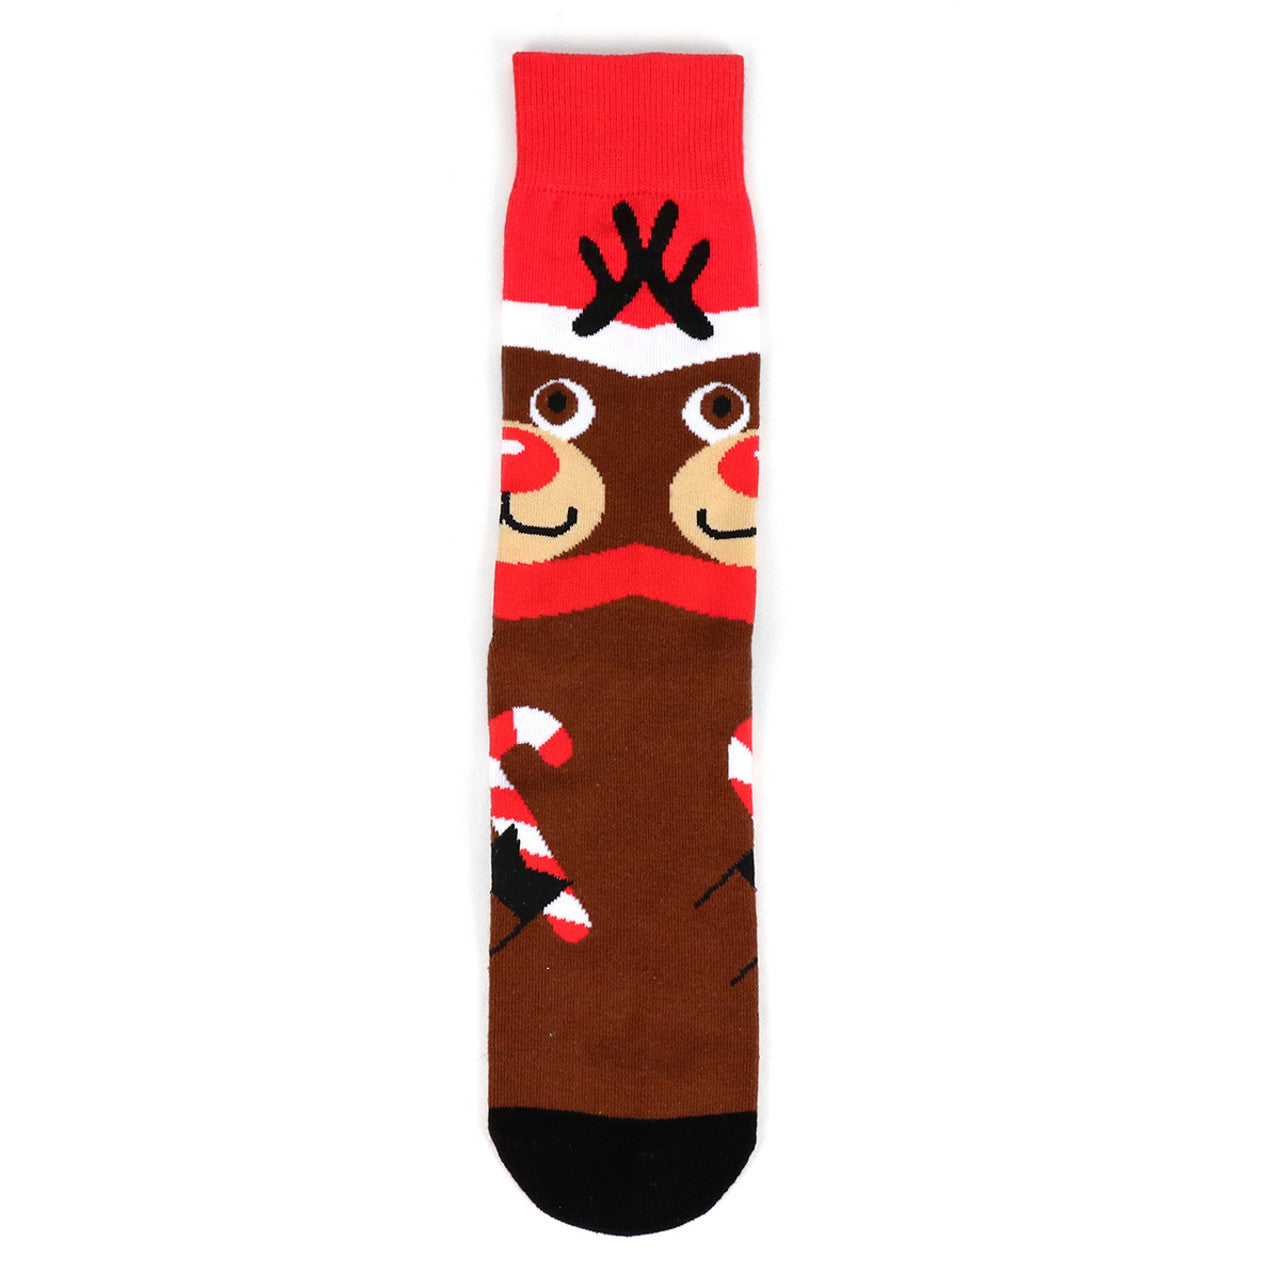 A pair of men's crew socks featuring a design inspired by Rudolph the Red-Nosed Reindeer. The socks have a brown base with Rudolph's face near the top, complete with a red nose, black eyes, and antlers. The toe and heel are black, and there are candy cane motifs on the foot. The top of the socks is red with a white band, resembling Rudolph's festive hat.